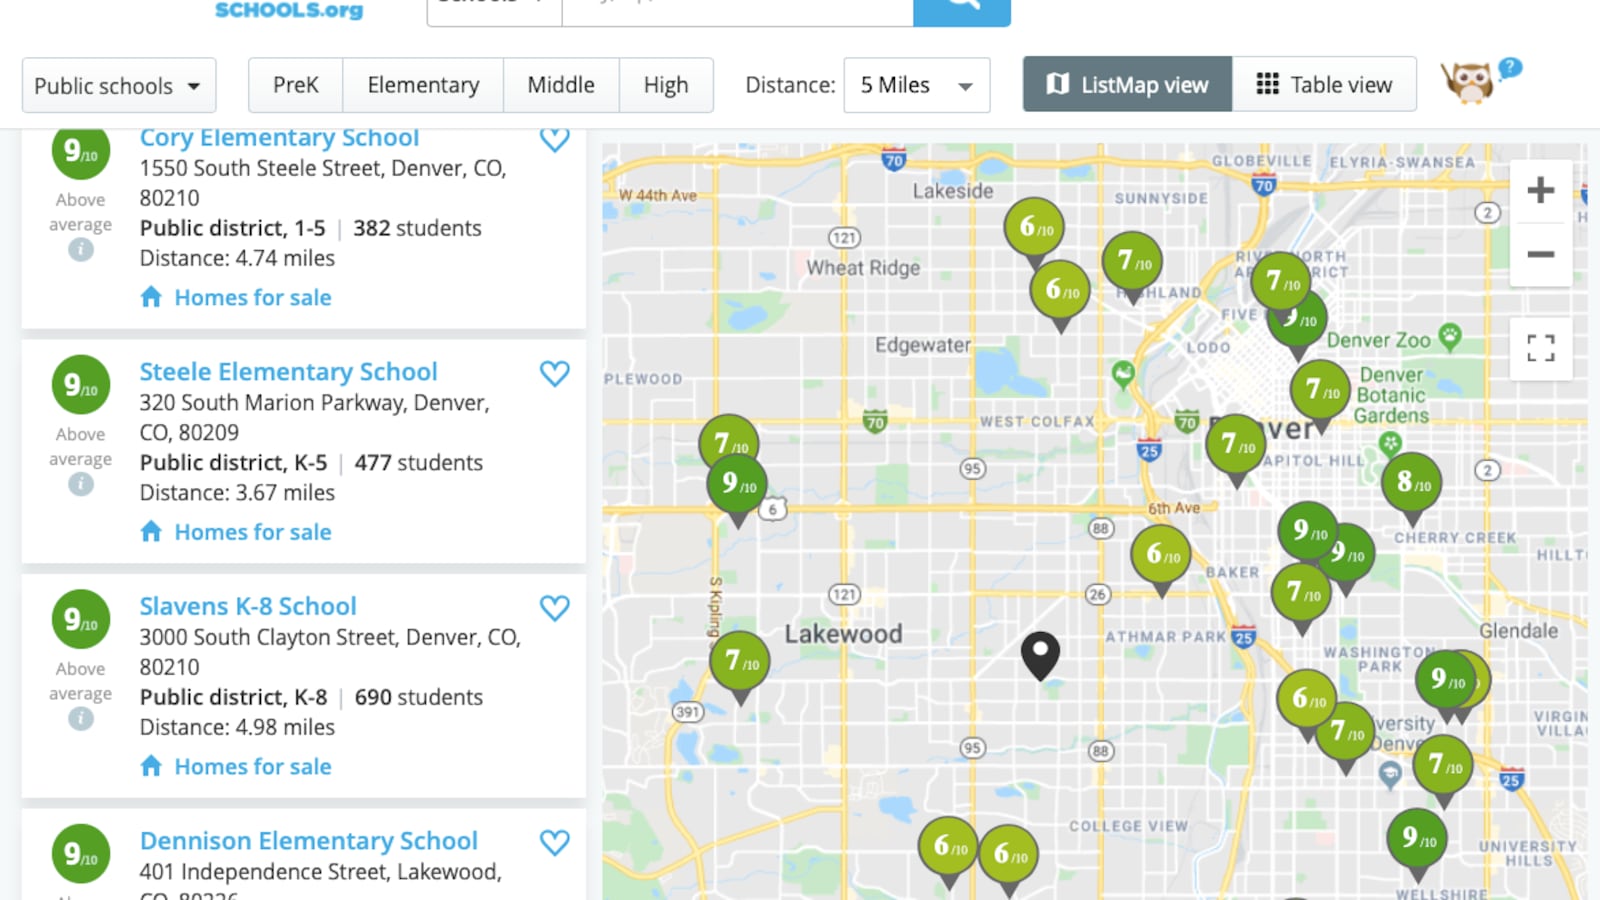 A screenshot from GreatSchools website, showing a search for schools with a Denver zip code.